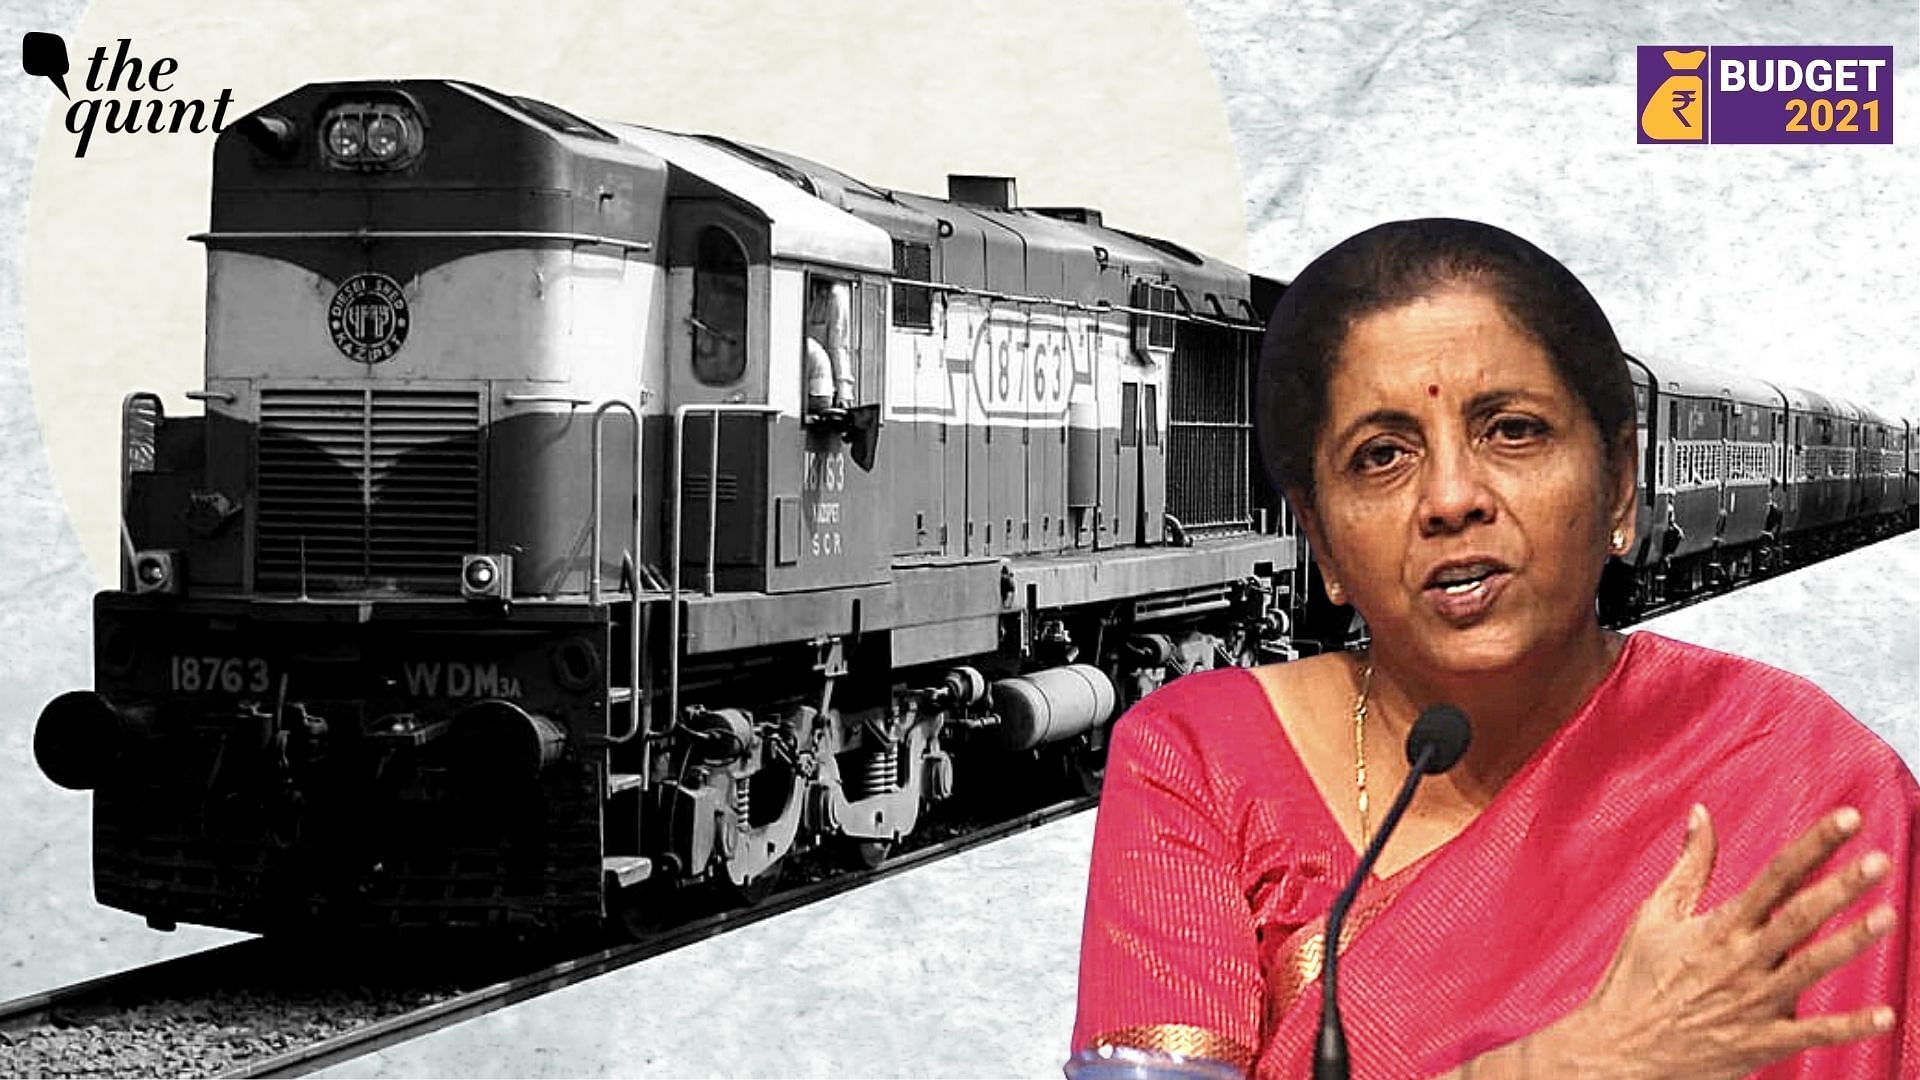 Presenting the Union Budget 2021-22, Finance Minister Nirmala Sitharaman on Monday, 1 February, allocated a sum of Rs 1,10,055 crore to Railways and said that the Indian Railways has prepared a National Rail Plan for India 2030.